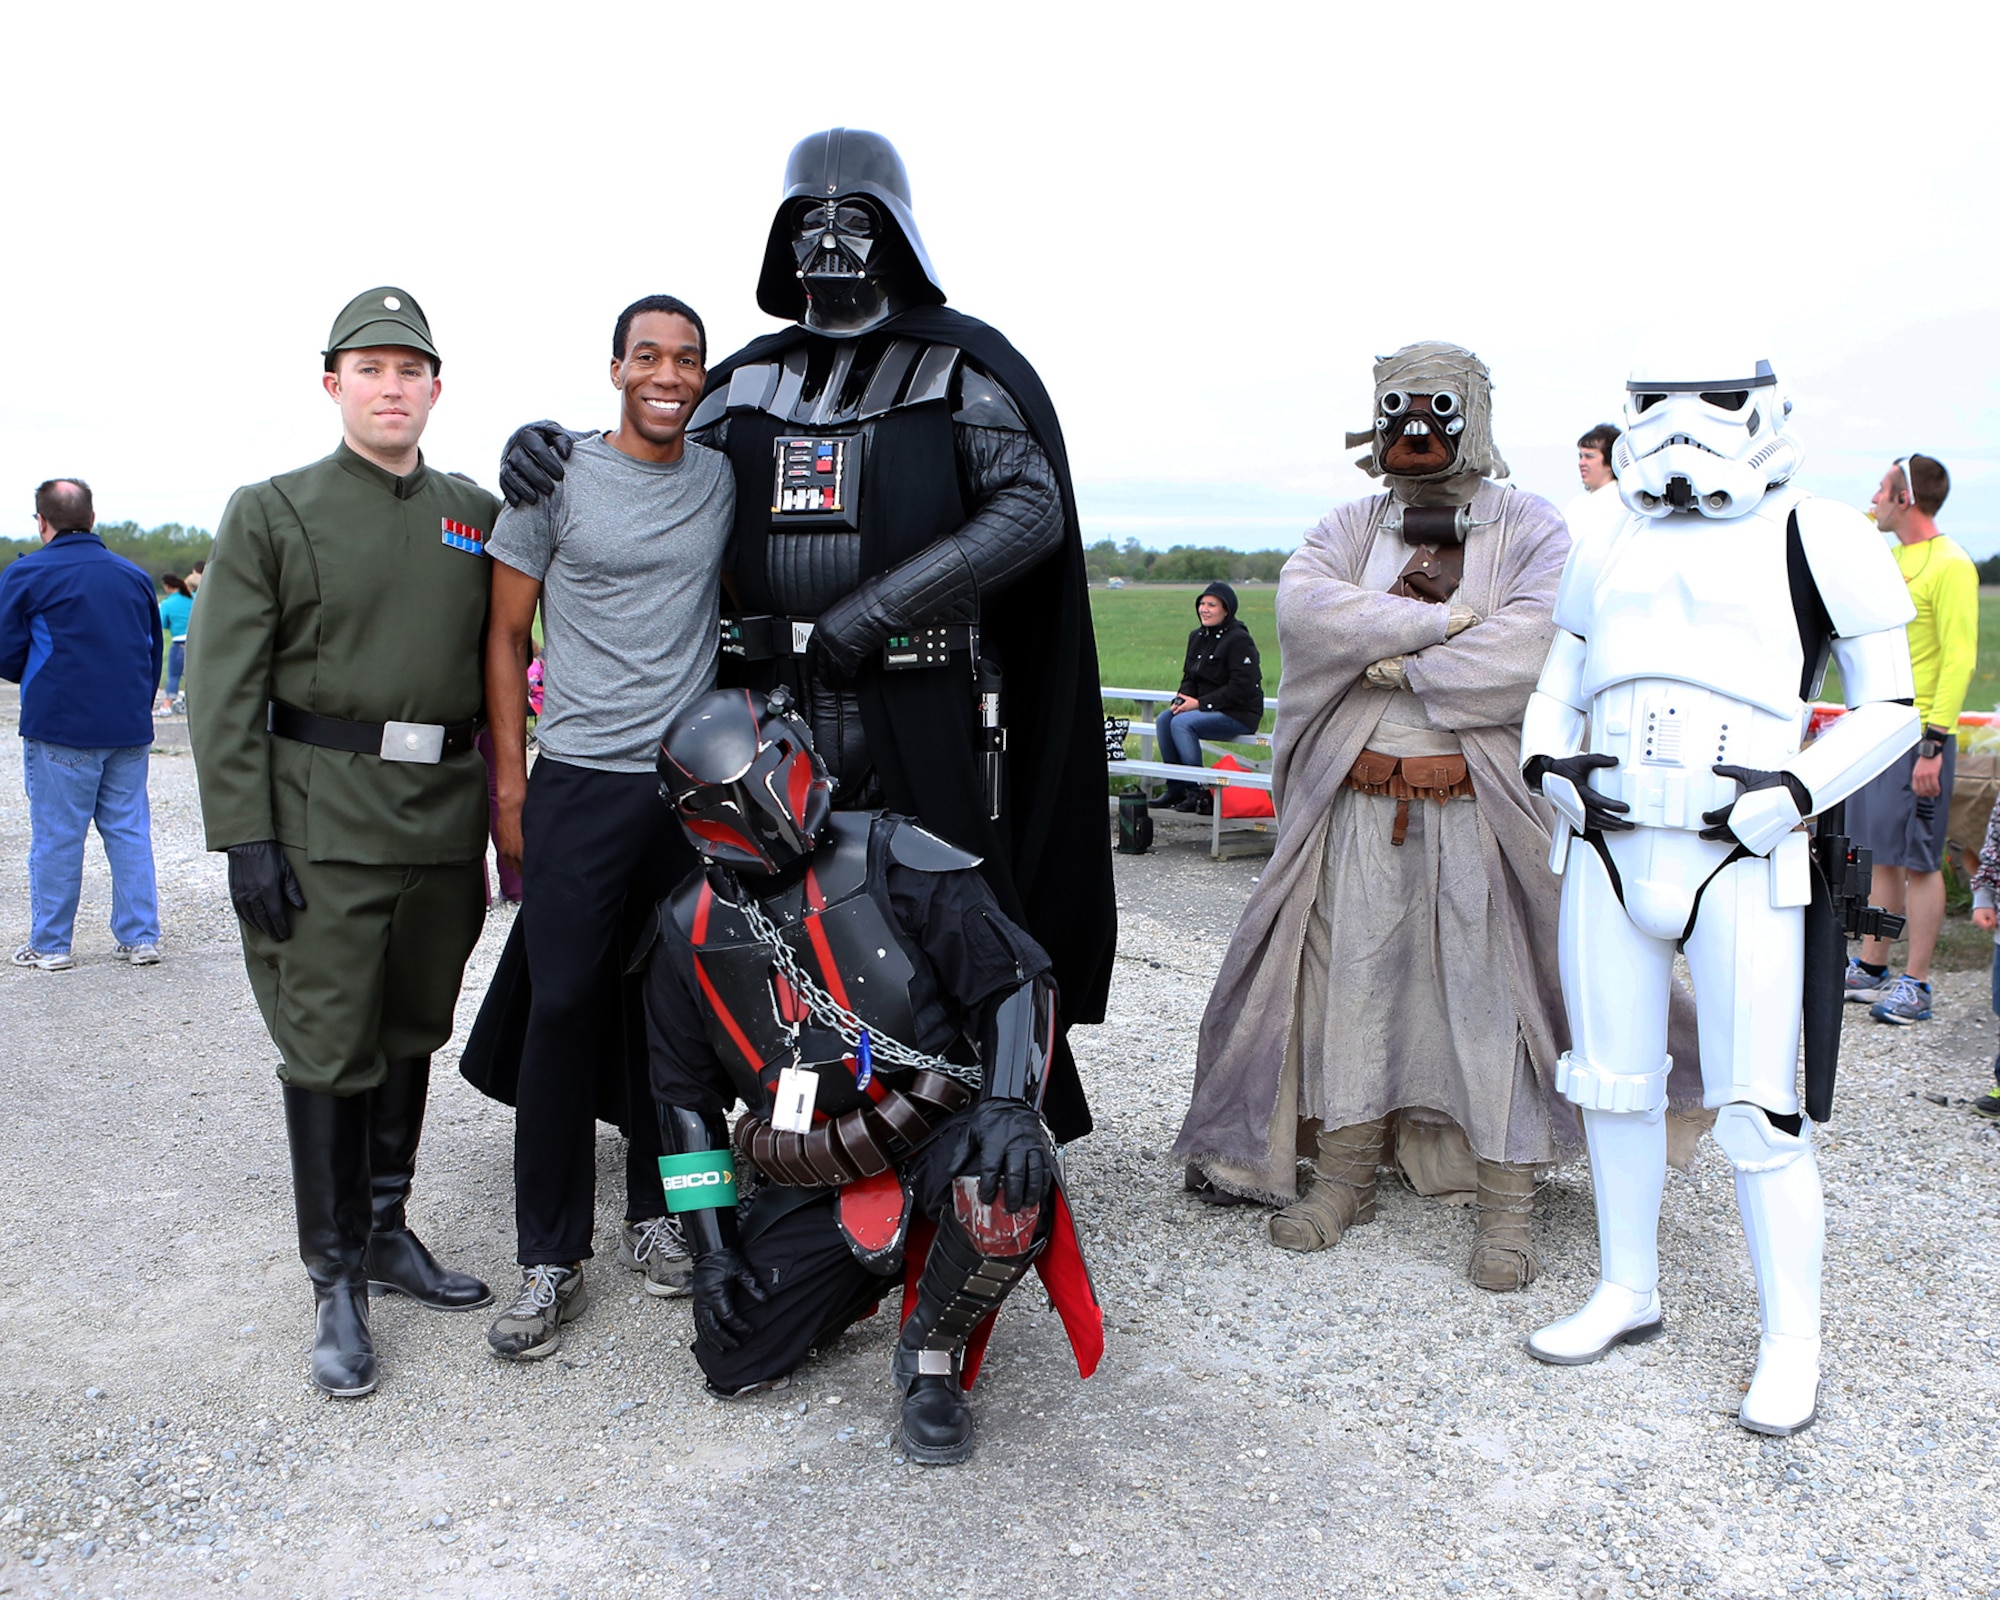 DAYTON, Ohio (05/2013) -- Darth Vader and other Star Wars characters congratulate the winner of the 5K fun run during Space Fest on May 4 at the National Museum of the U.S. Air Force. (U.S. Air Force photo by Don Popp)